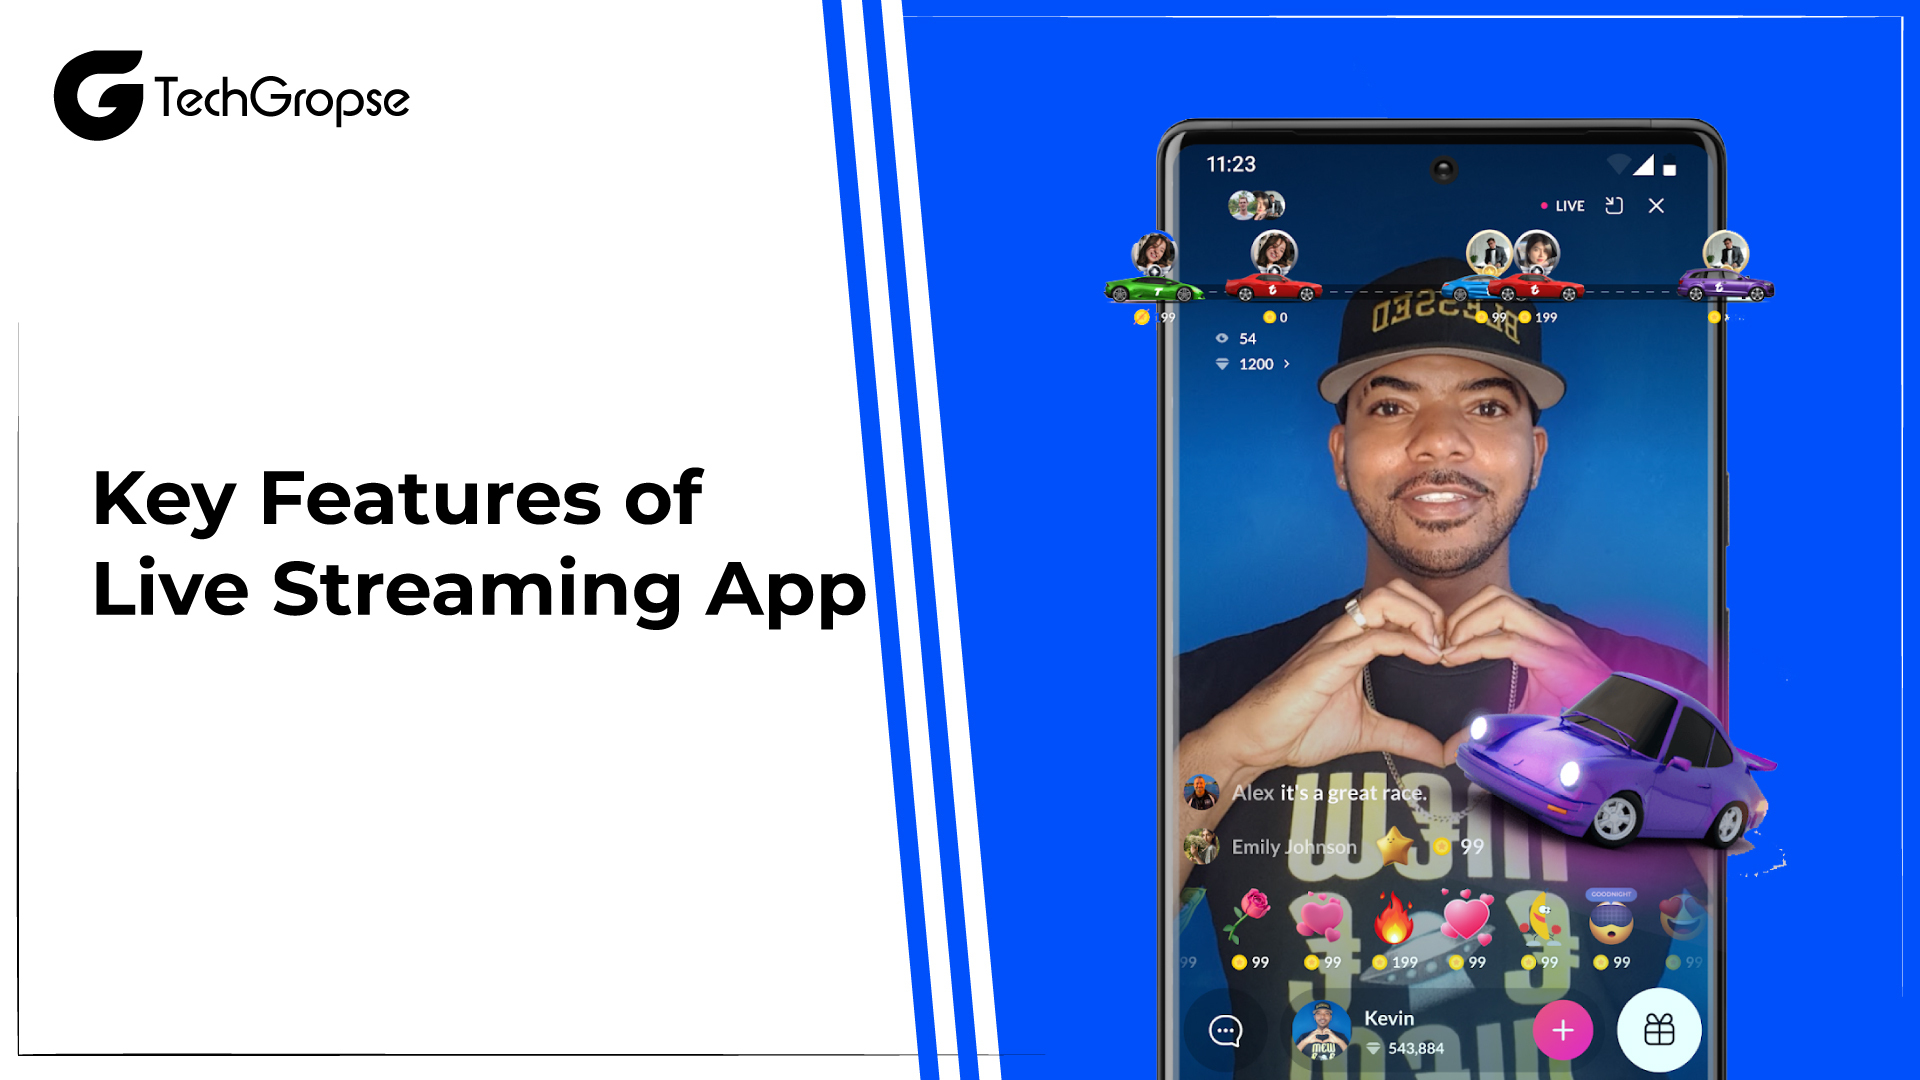 Key Features of Live Streaming App